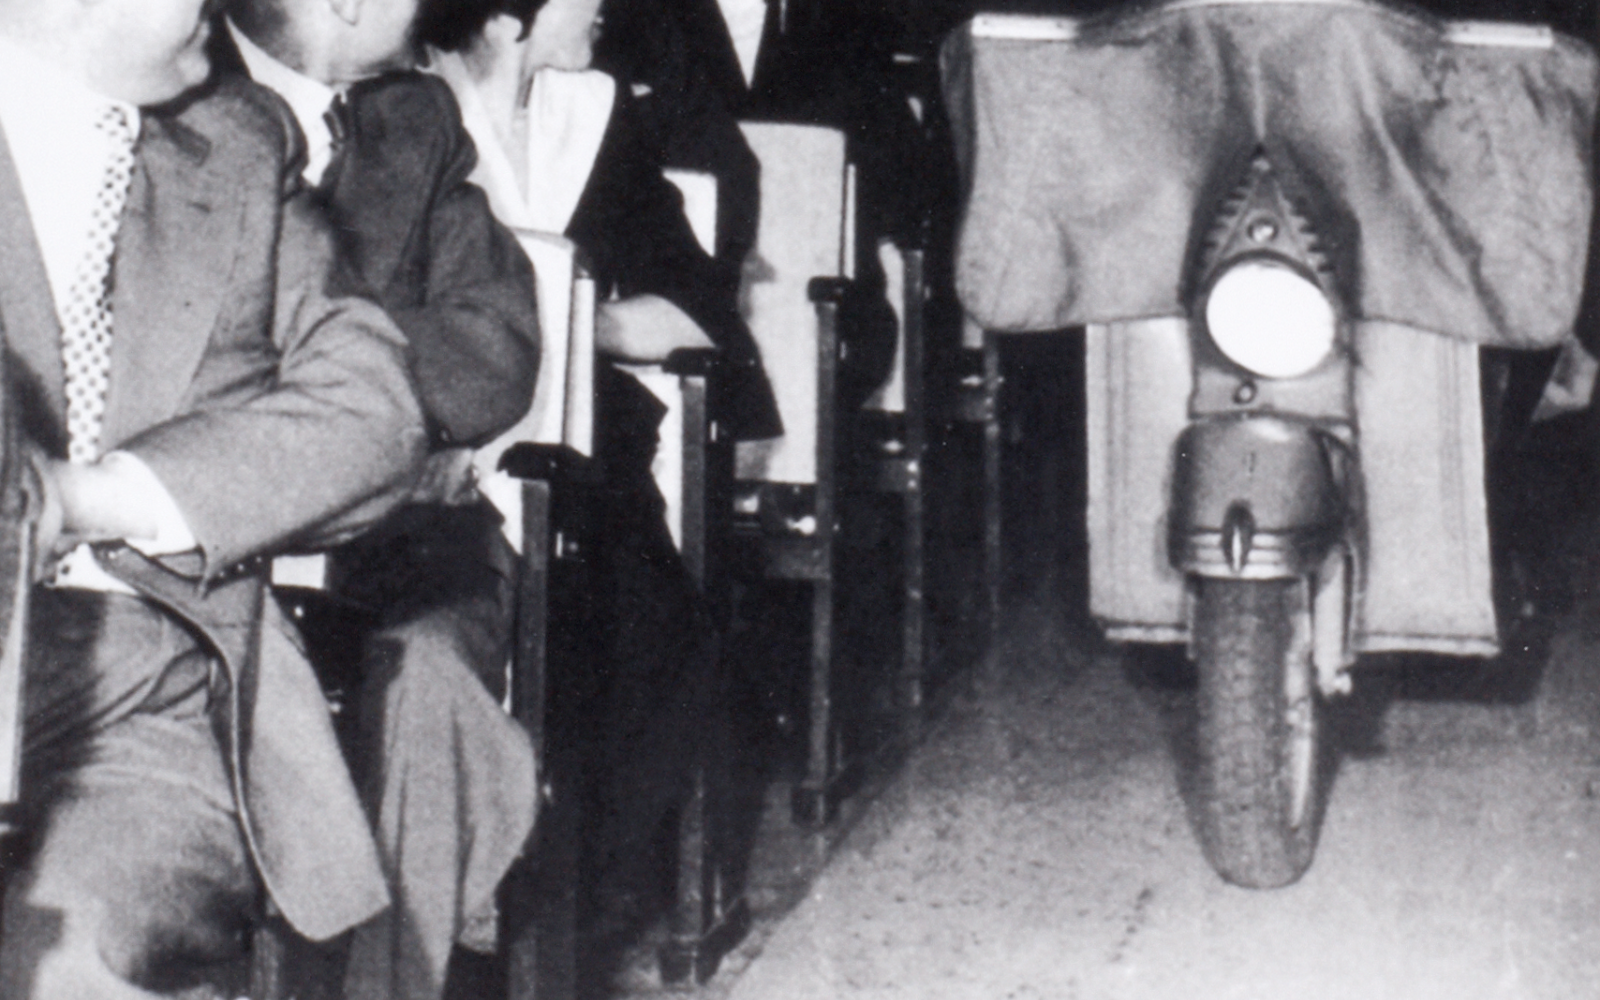  A black-and-white photo shows a man riding a moped into a room where many people sit on chairs.